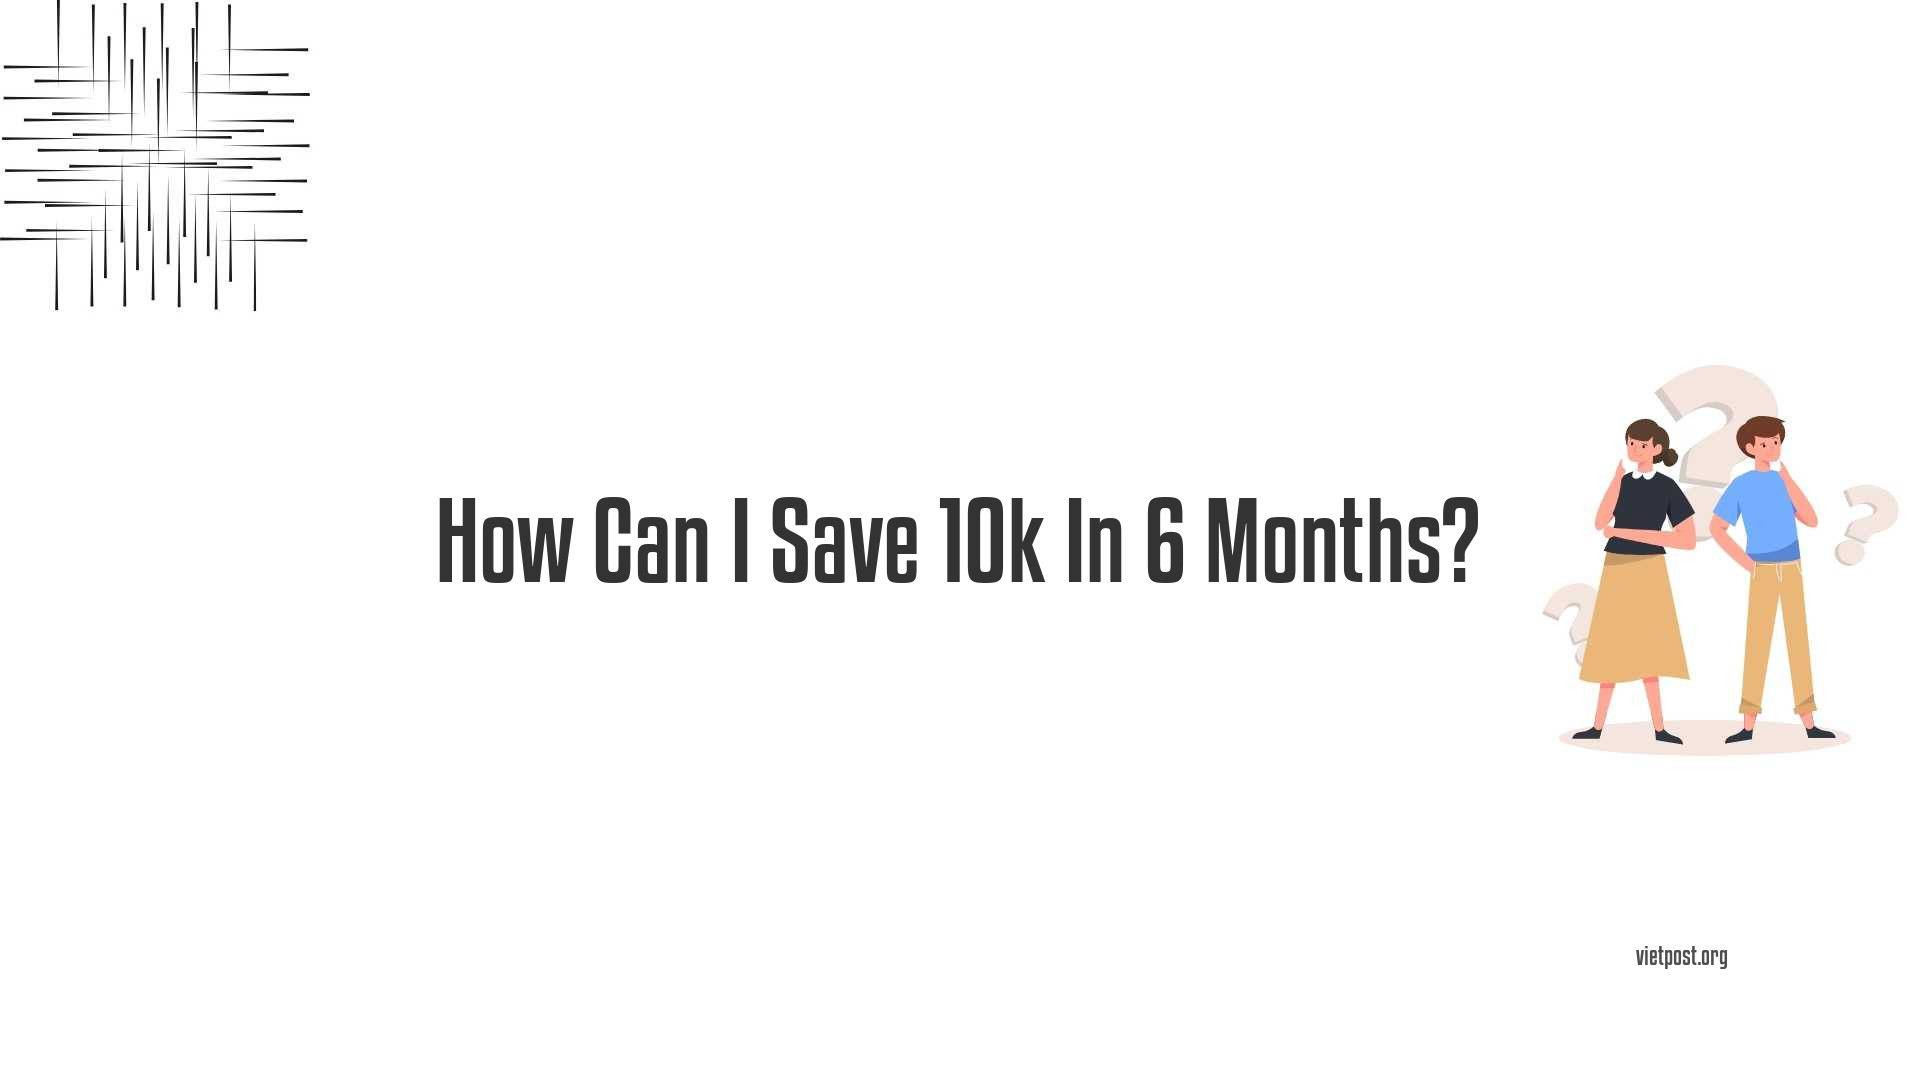 How Can I Save 10k In 6 Months?